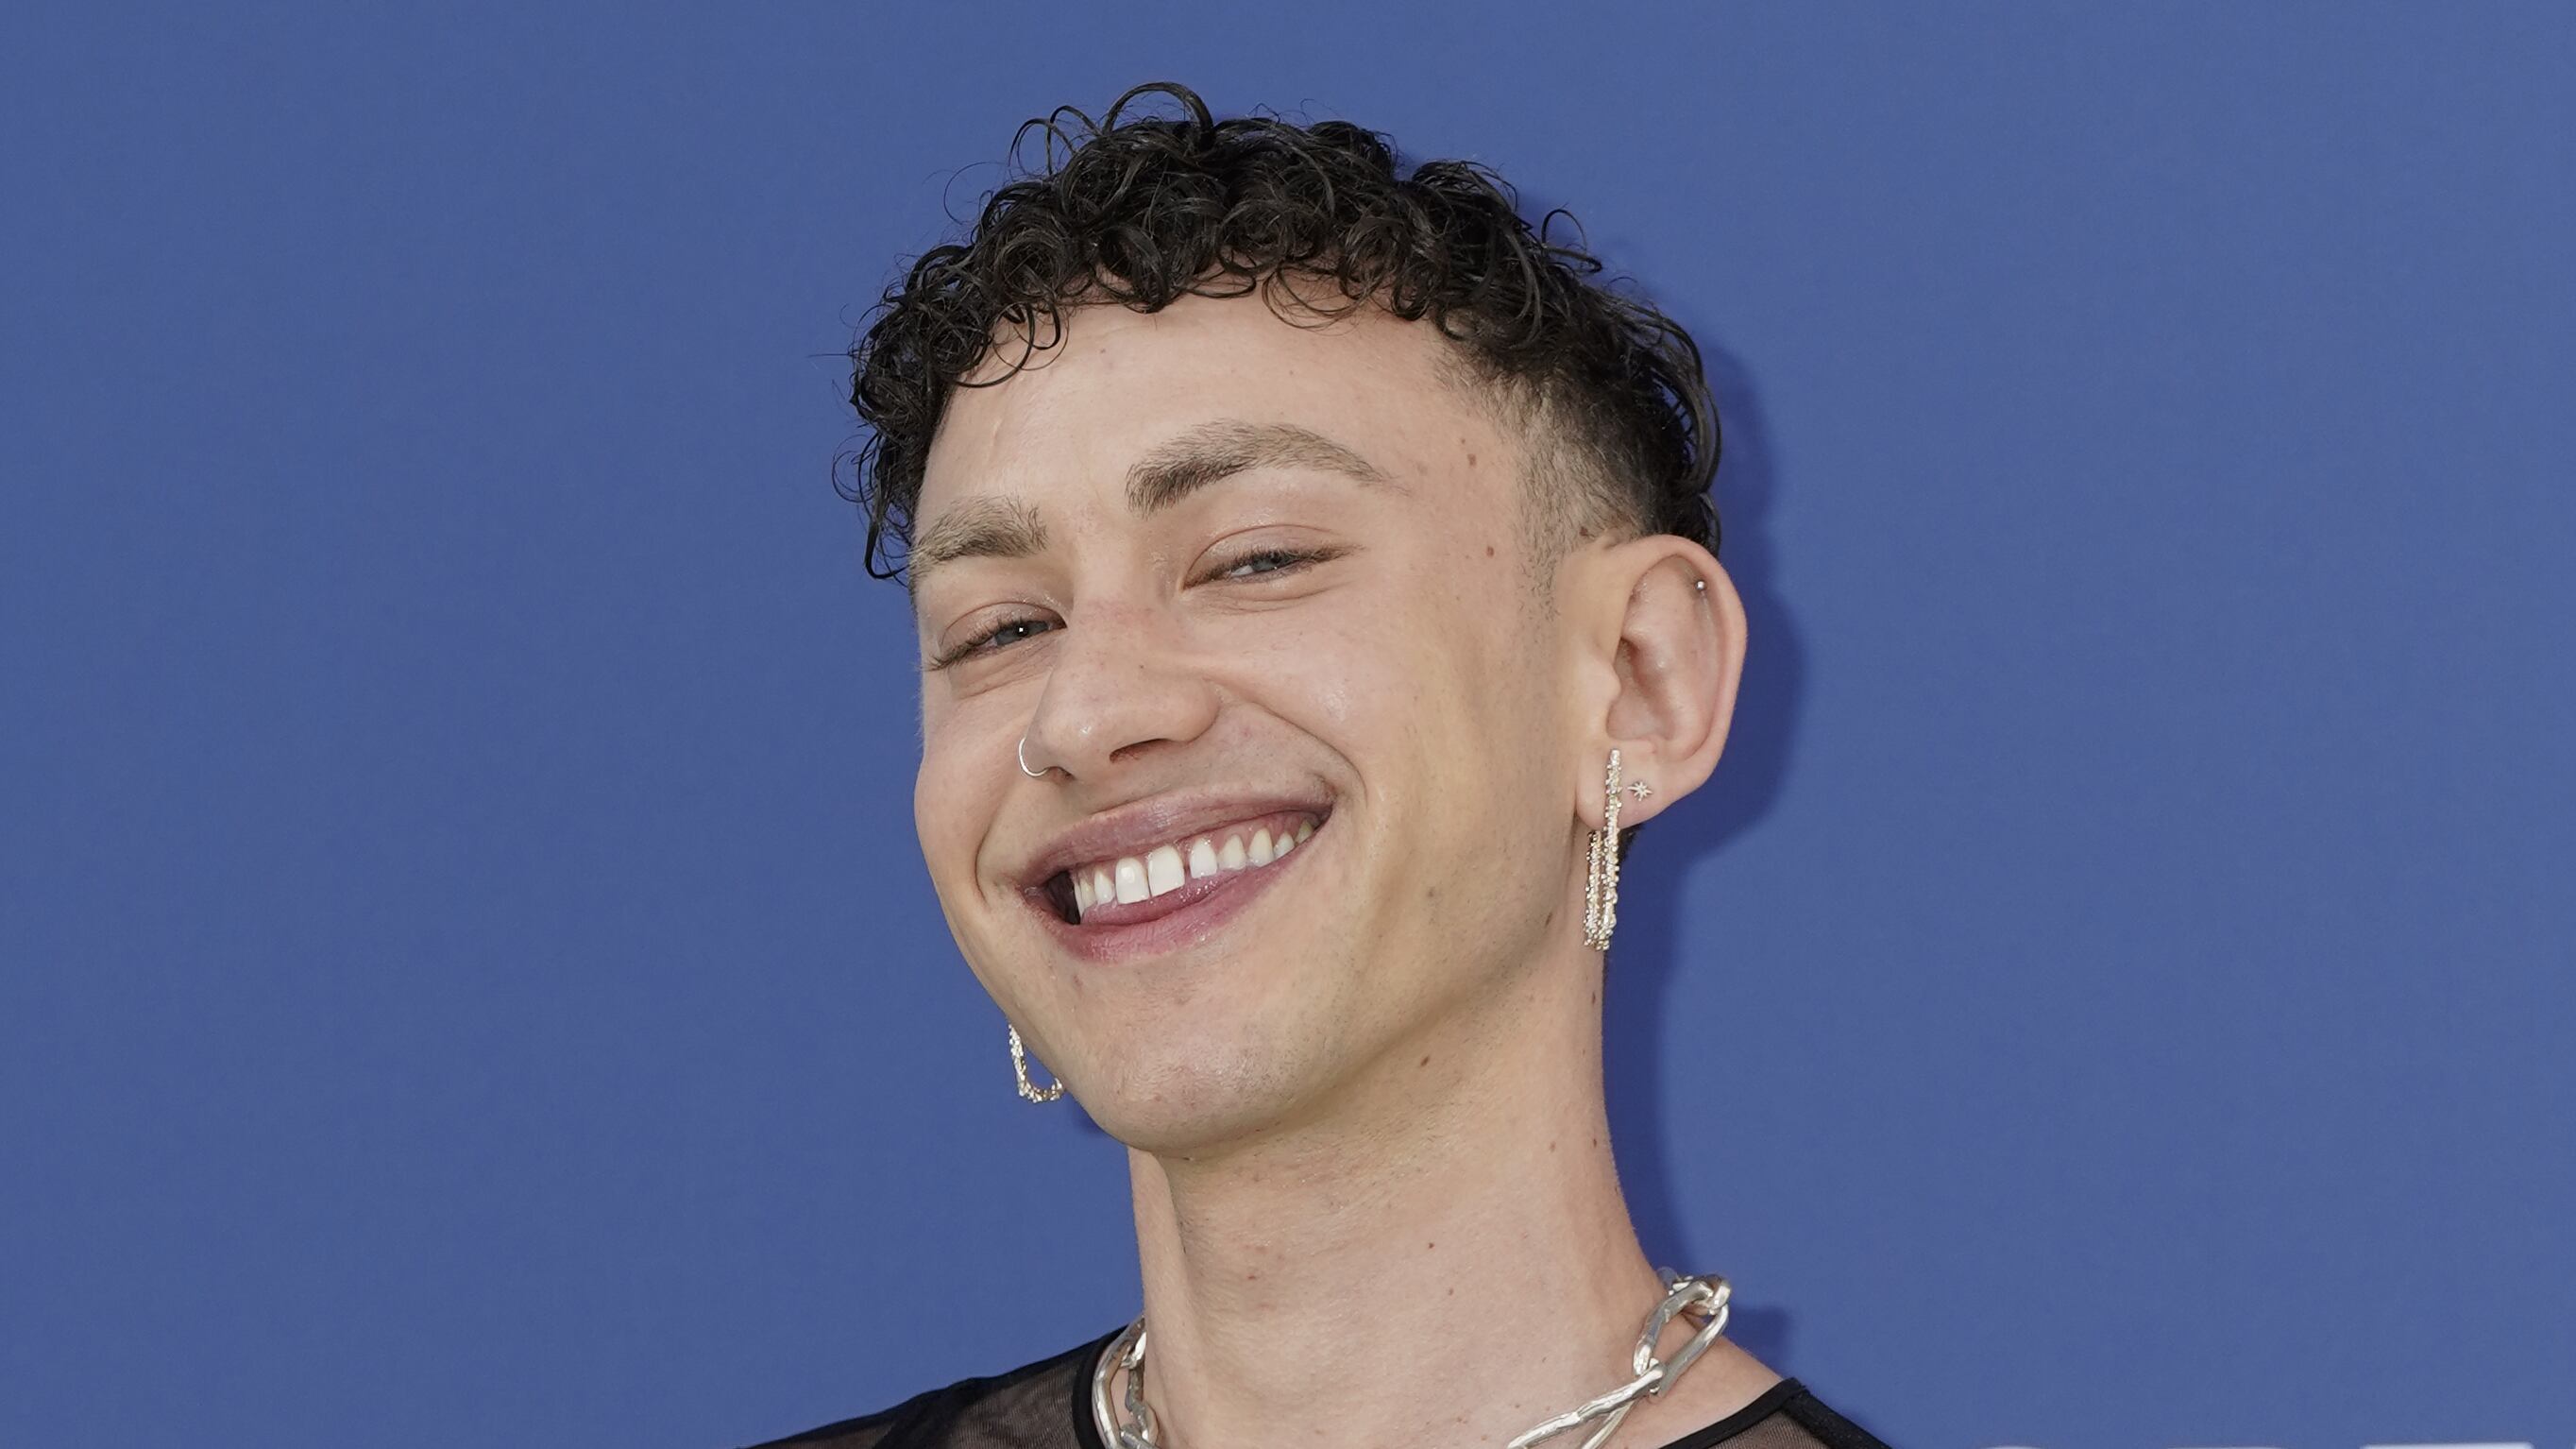 Olly Alexander will represent the UK in the Eurovision Song Contest